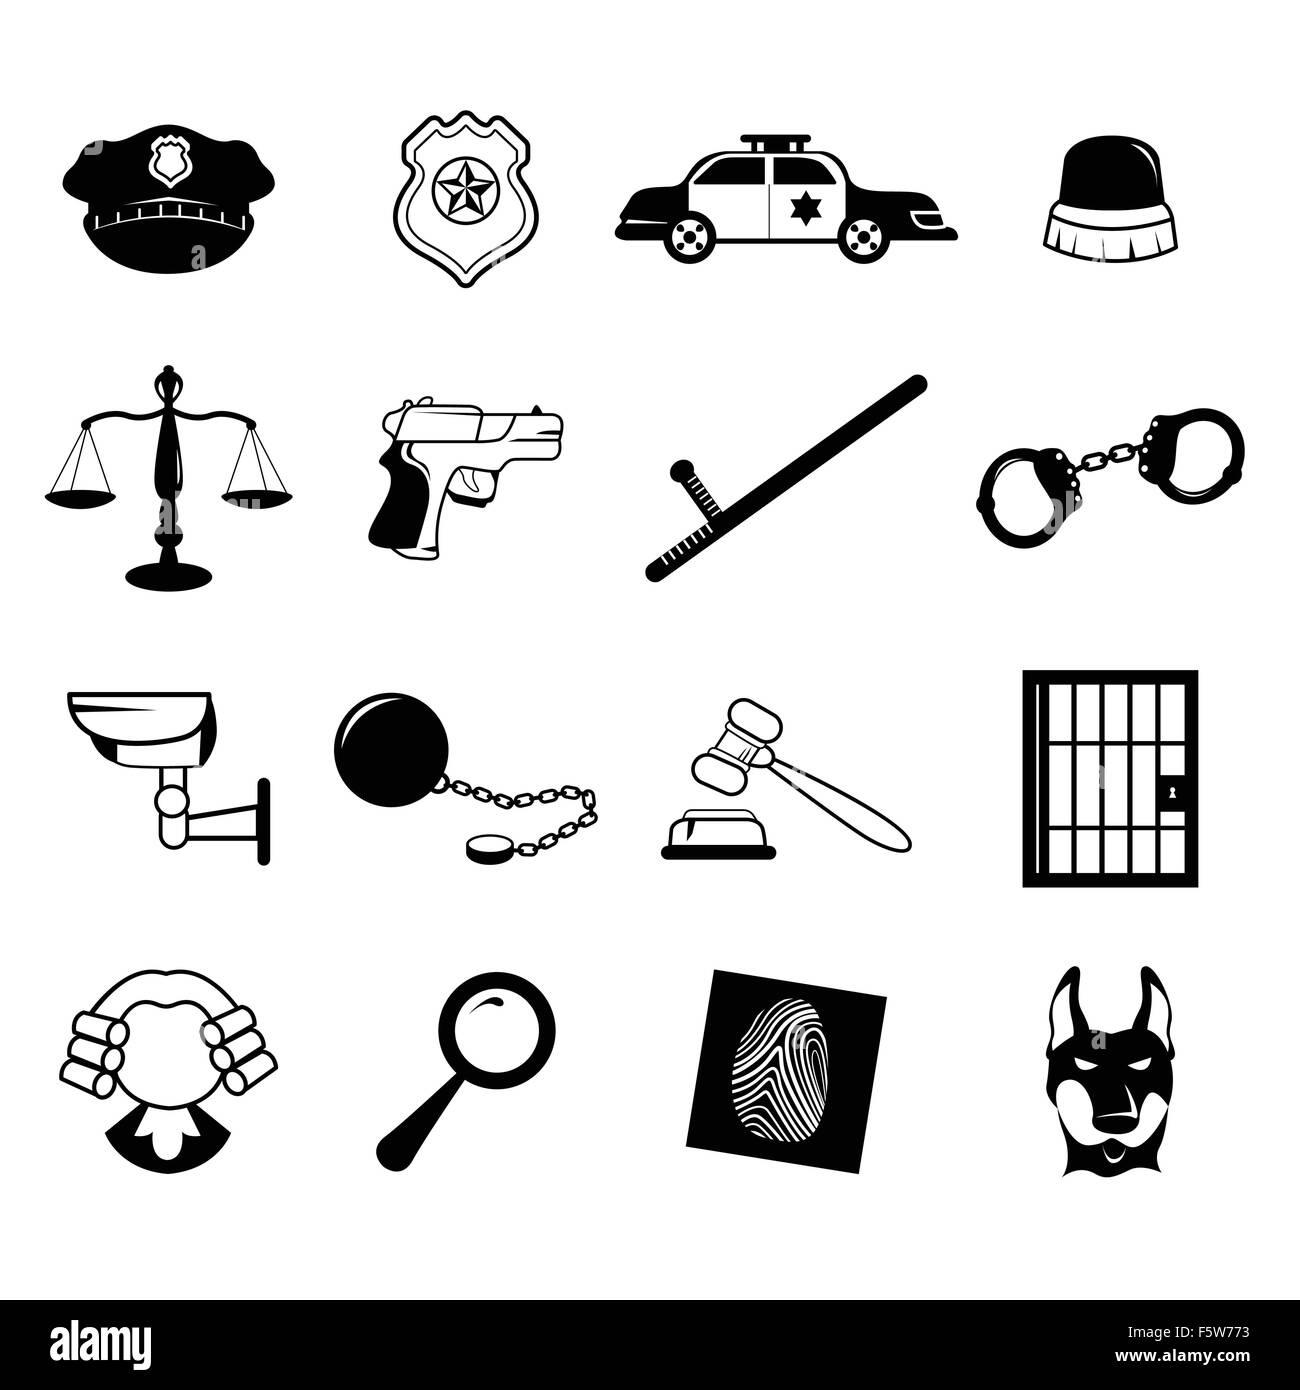 A vector illustration of law enforcement icons Stock Vector